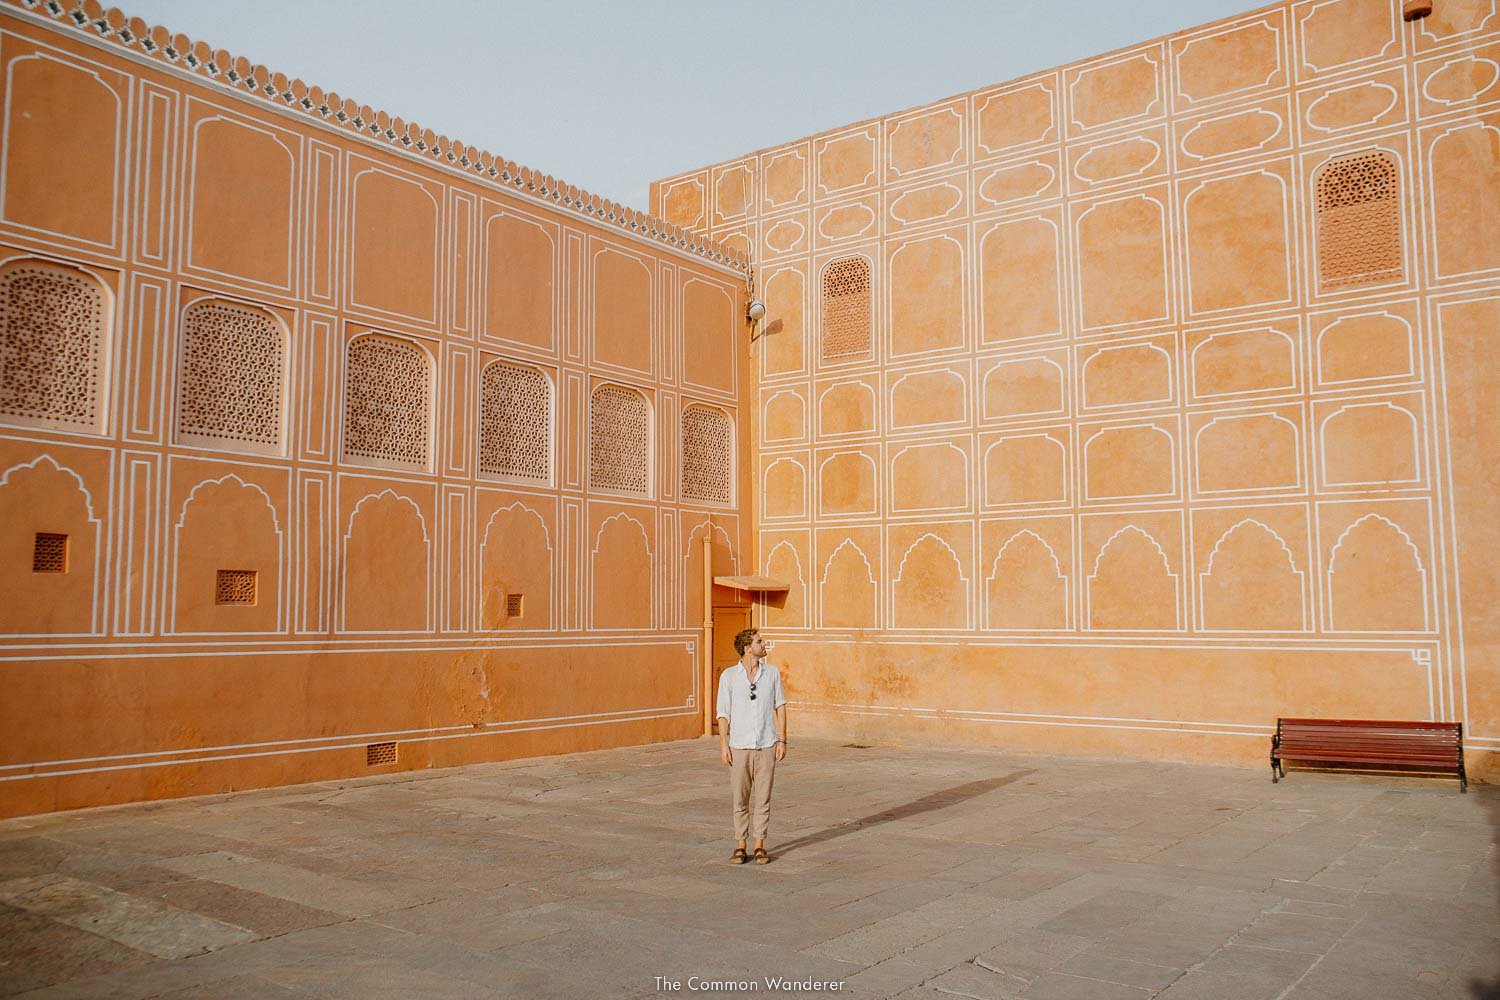 A guide to the city palace, Jaipur